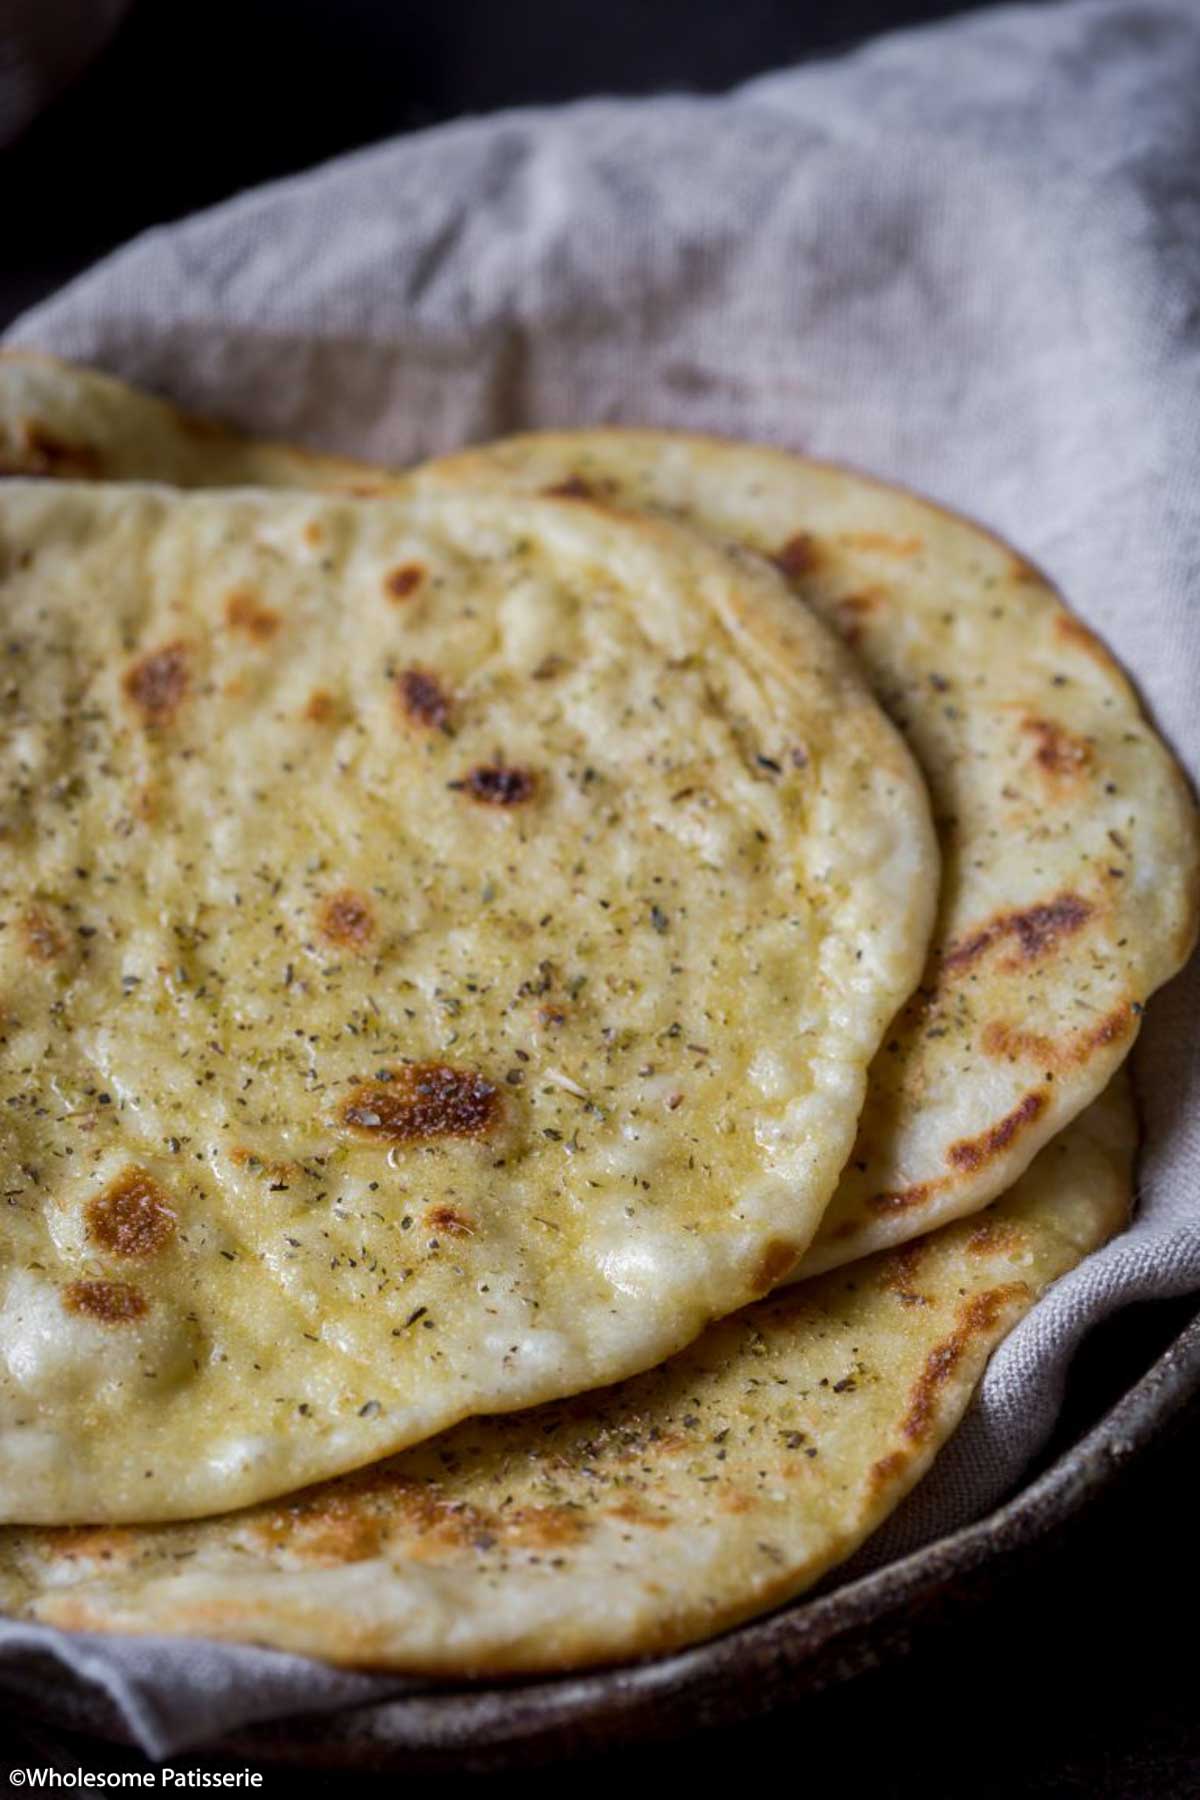 Homemade Pan Fried Flat Bread with Garlic and Dried Herbs